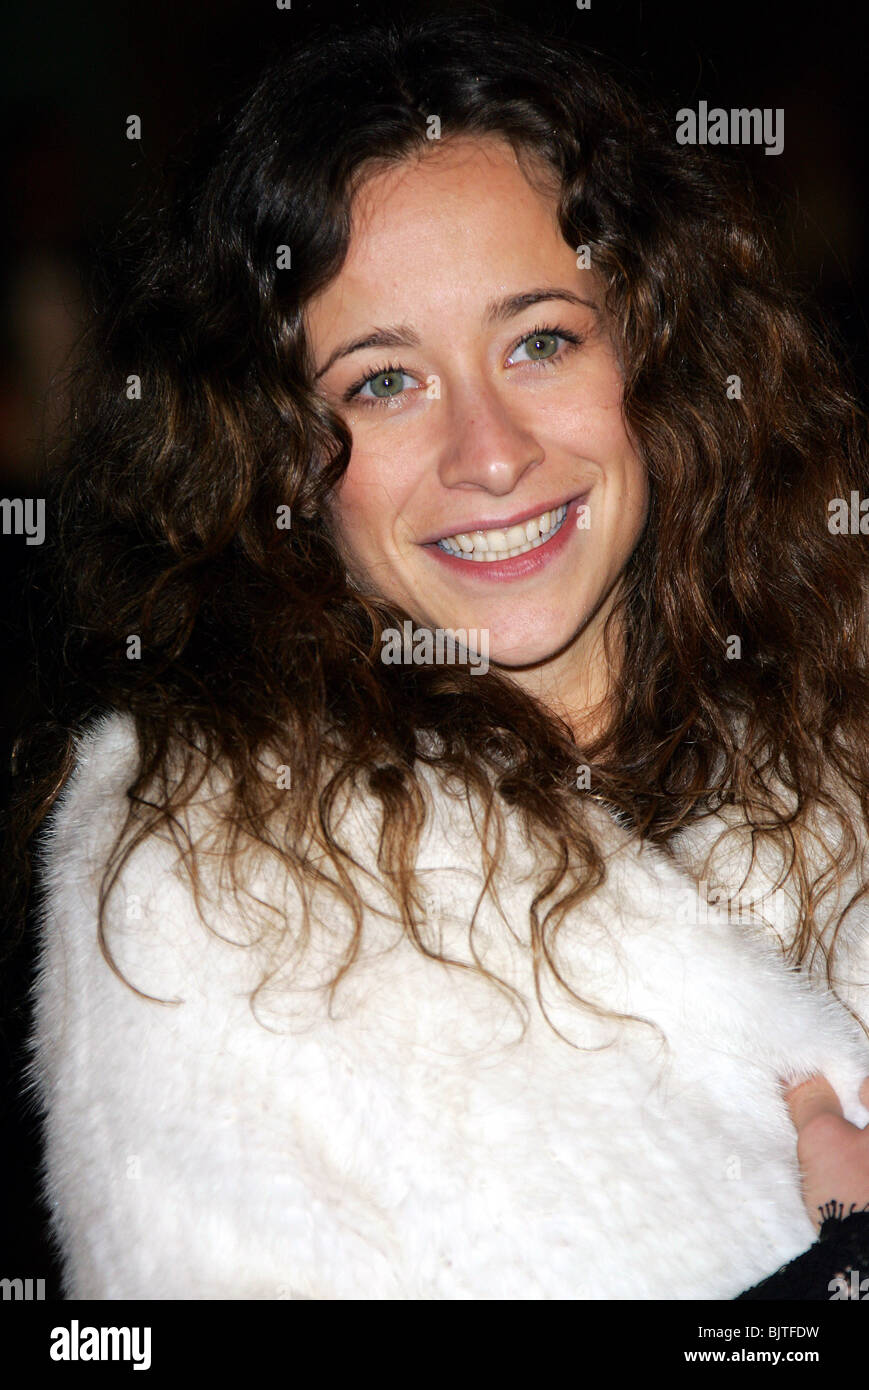 LEAH WOOD THE CHRONICLES OF NARNIA FILM PREMIER THE ROYAL ALBERT HALL LONDON ENGLAND 07 December 2005 Stock Photo